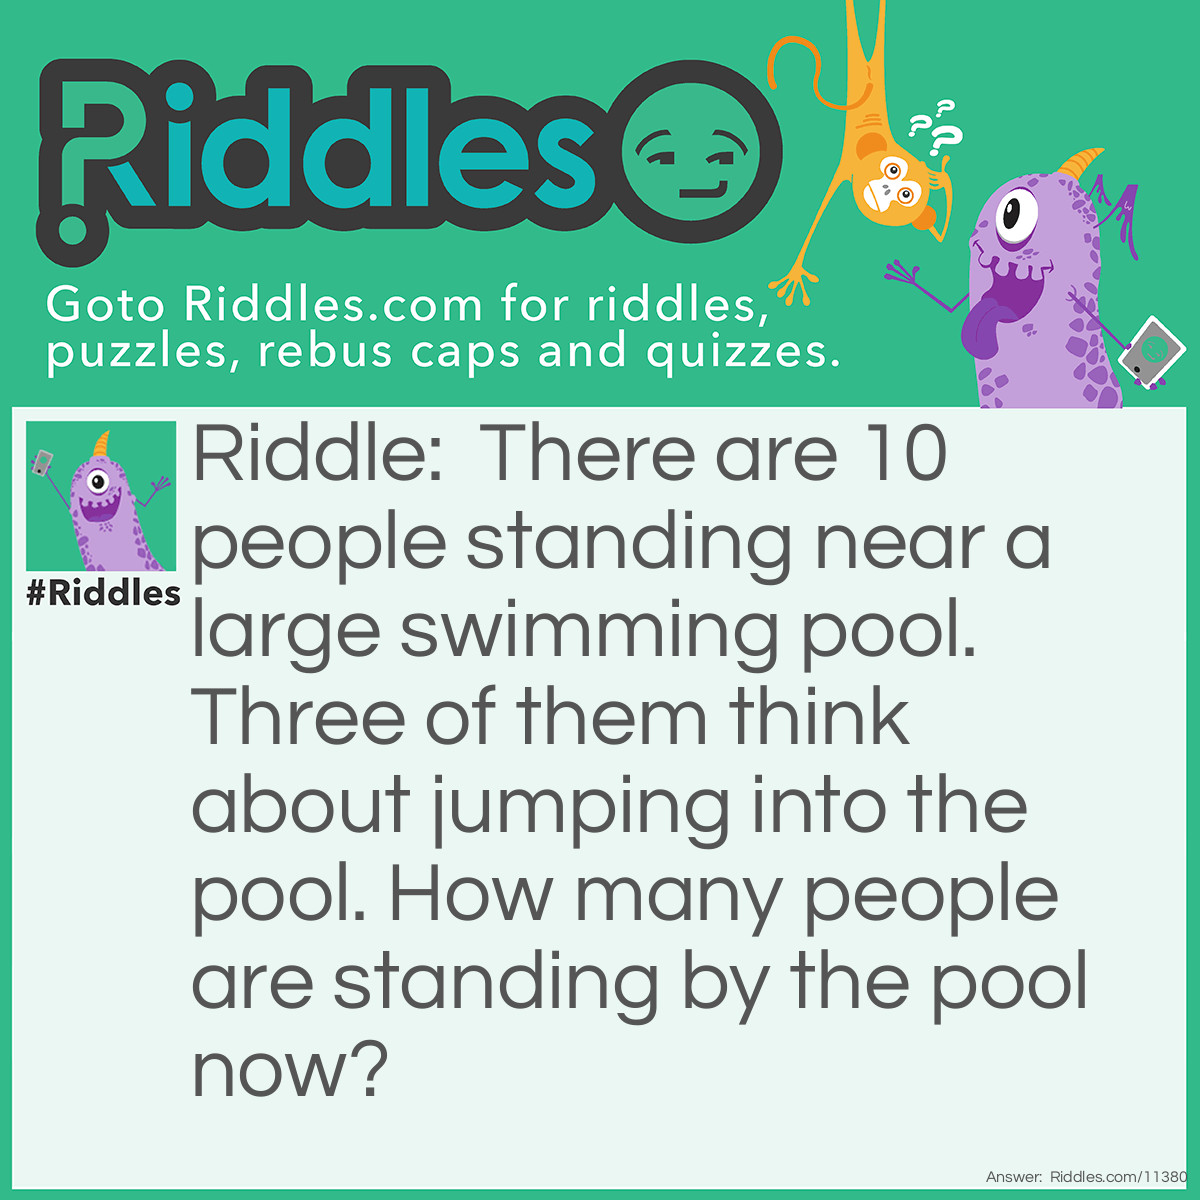 Riddle: There are 10 people standing near a large swimming pool. Three of them think about jumping into the pool. How many people are standing by the pool now? Answer: 10. Those three people simply "thought about jumping into the pool"; they didn't actually jump in.